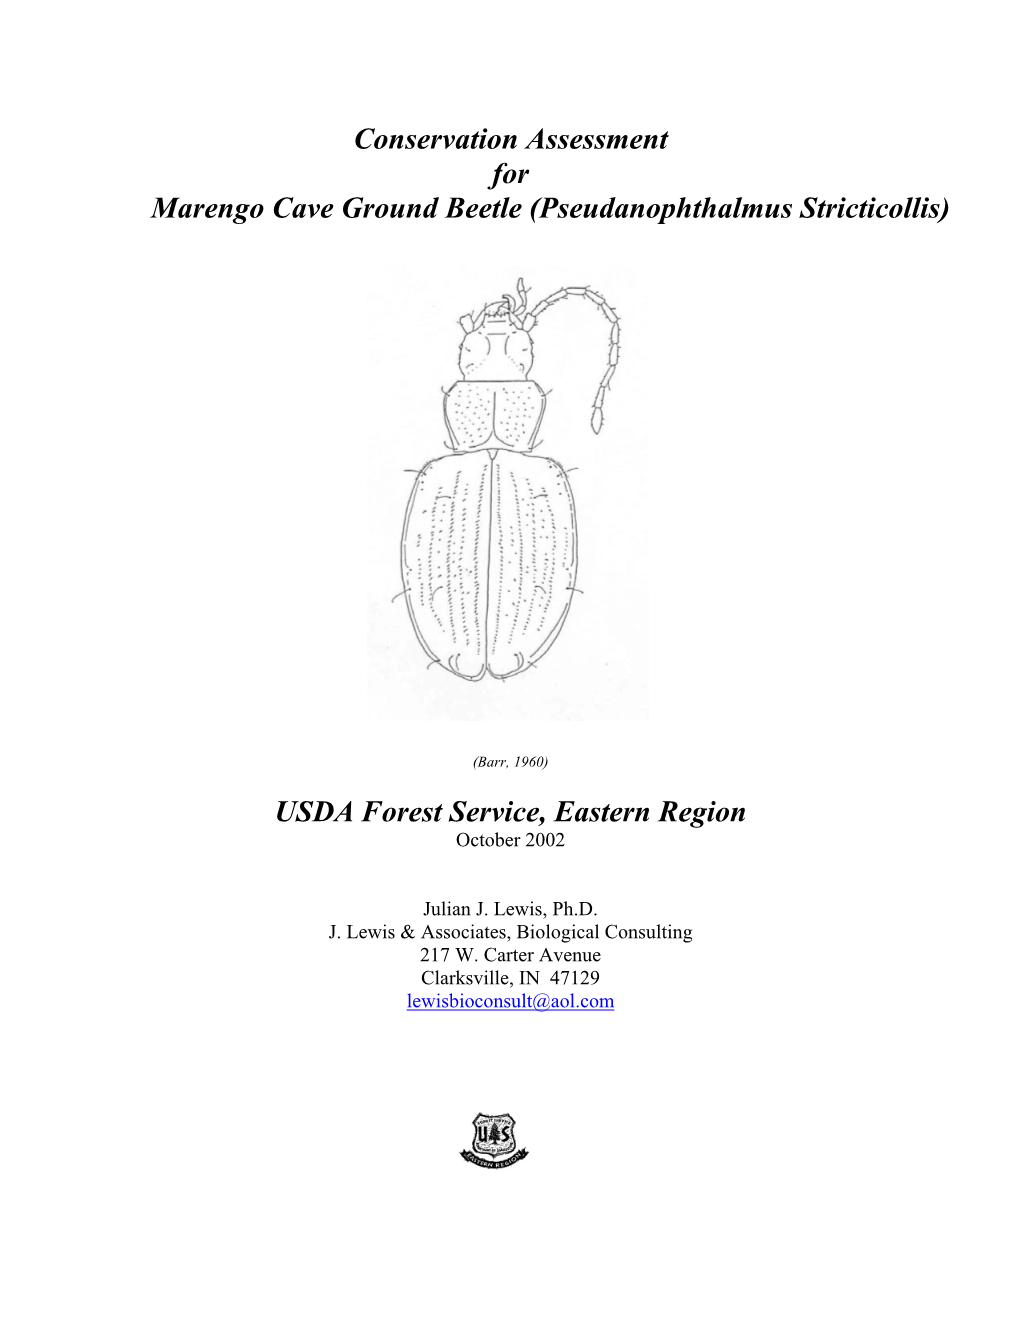 Conservation Assessment for Marengo Cave Ground Beetle (Pseudanophthalmus Stricticollis)